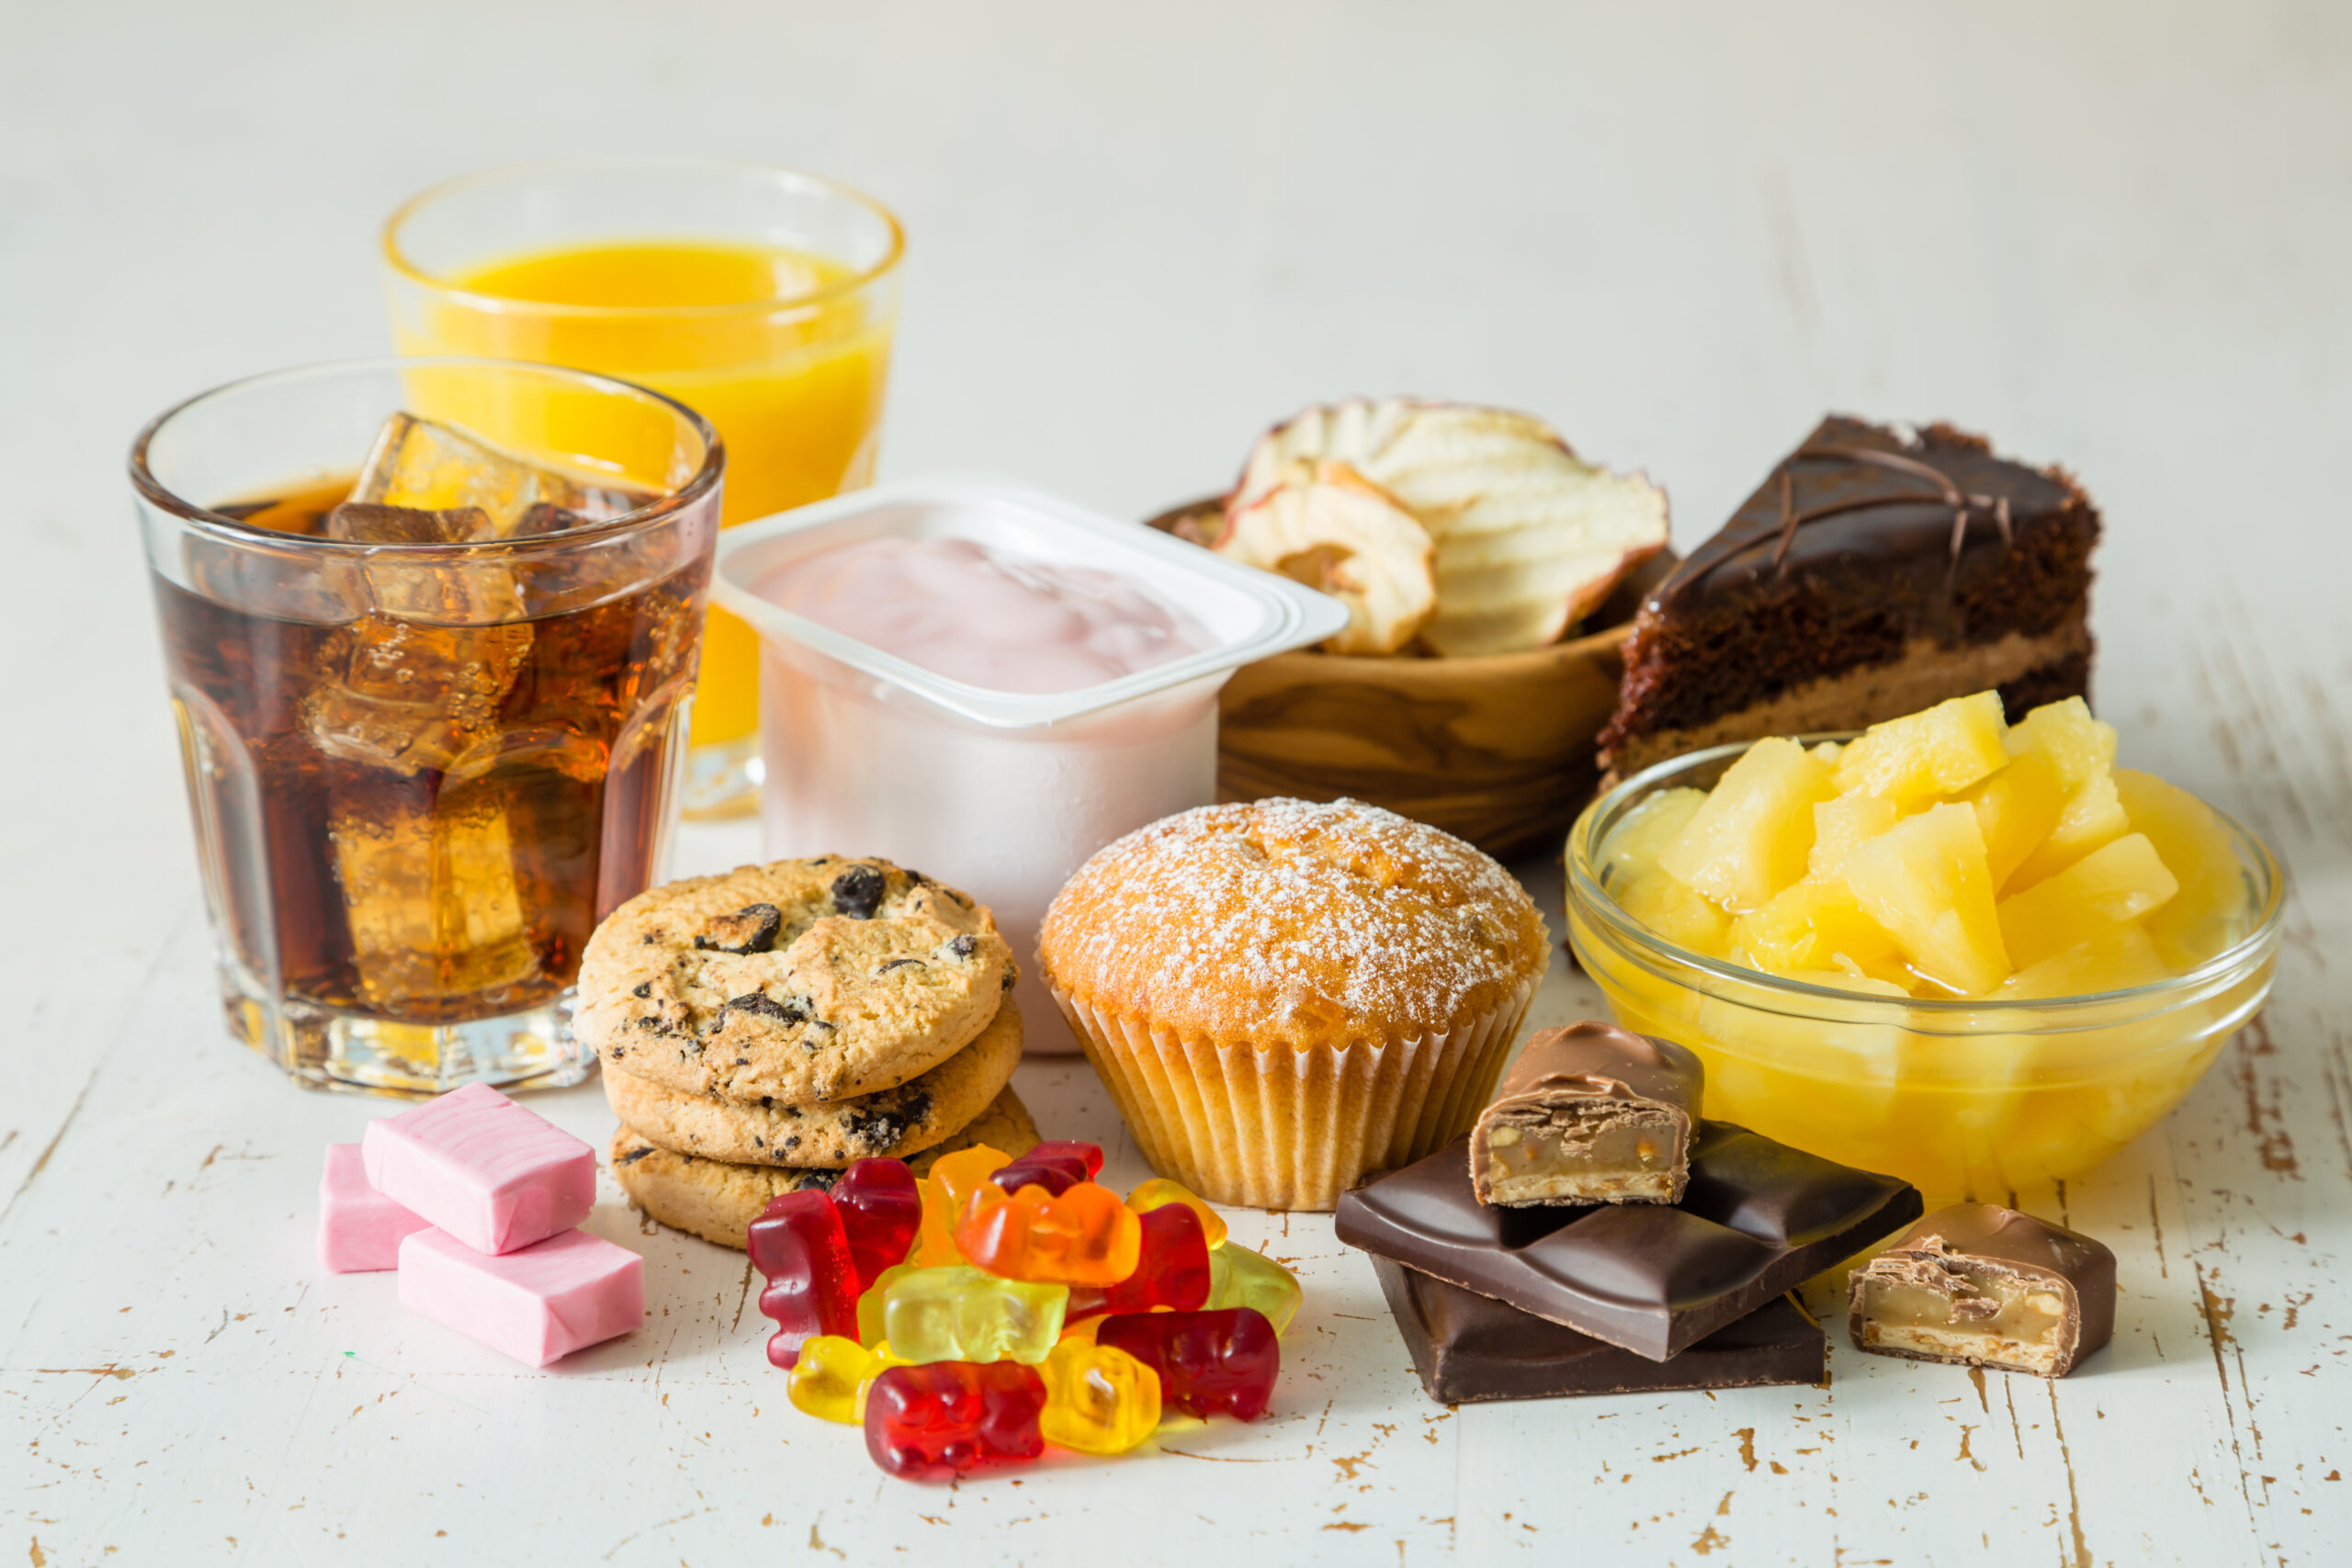 Selection of food high in sugar, copy space